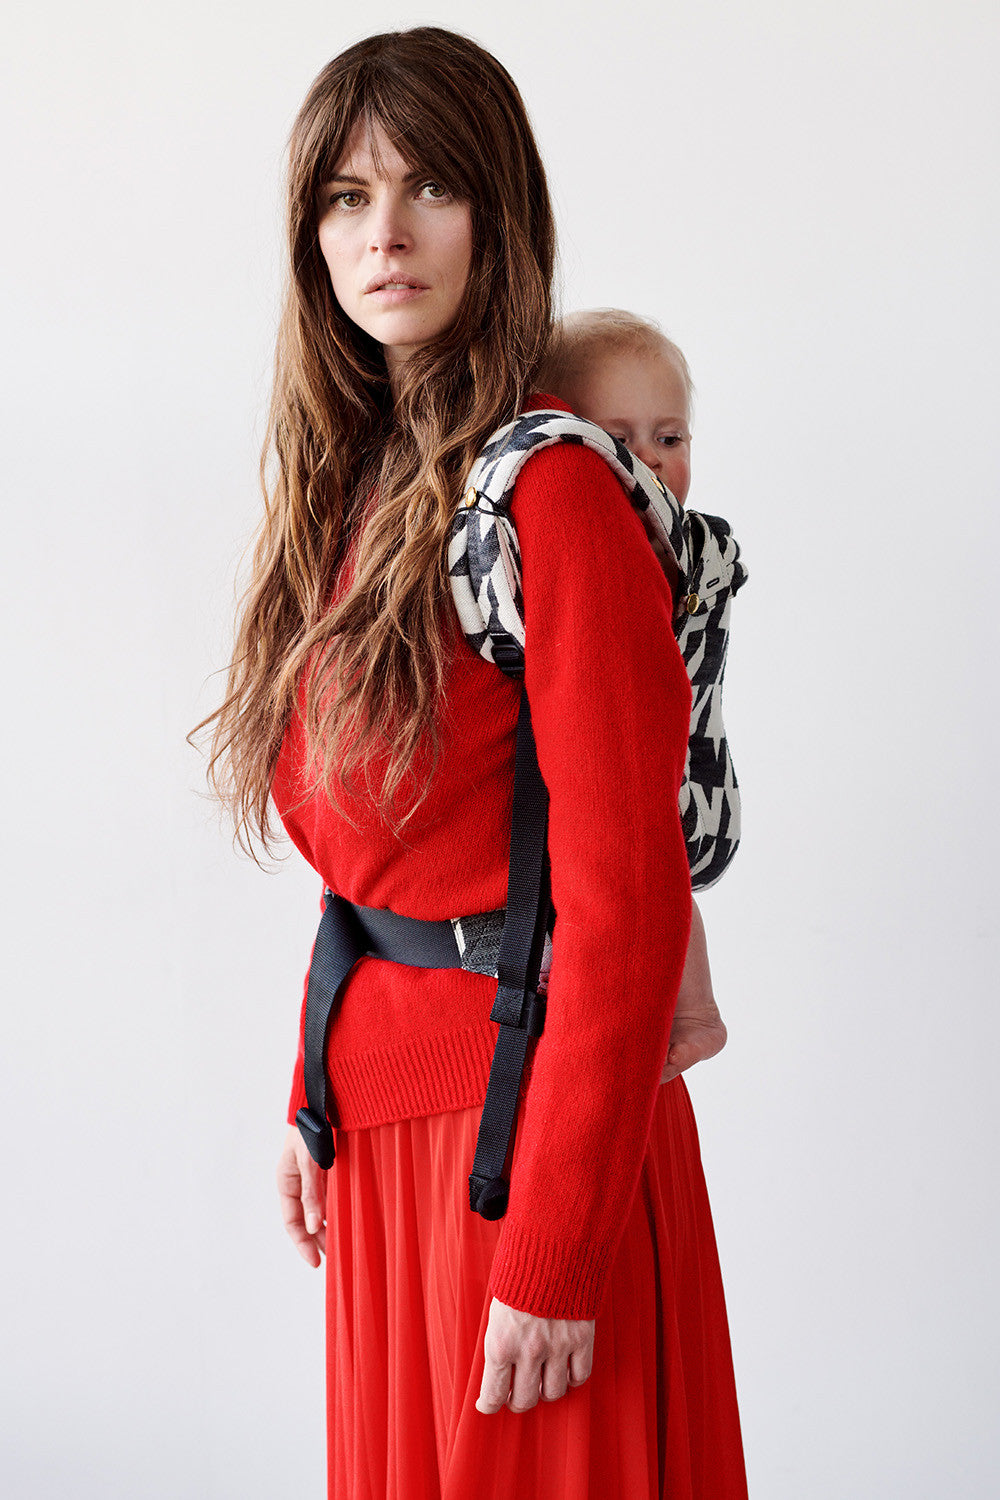 Bub's FeatherTouch Baby Carrier™